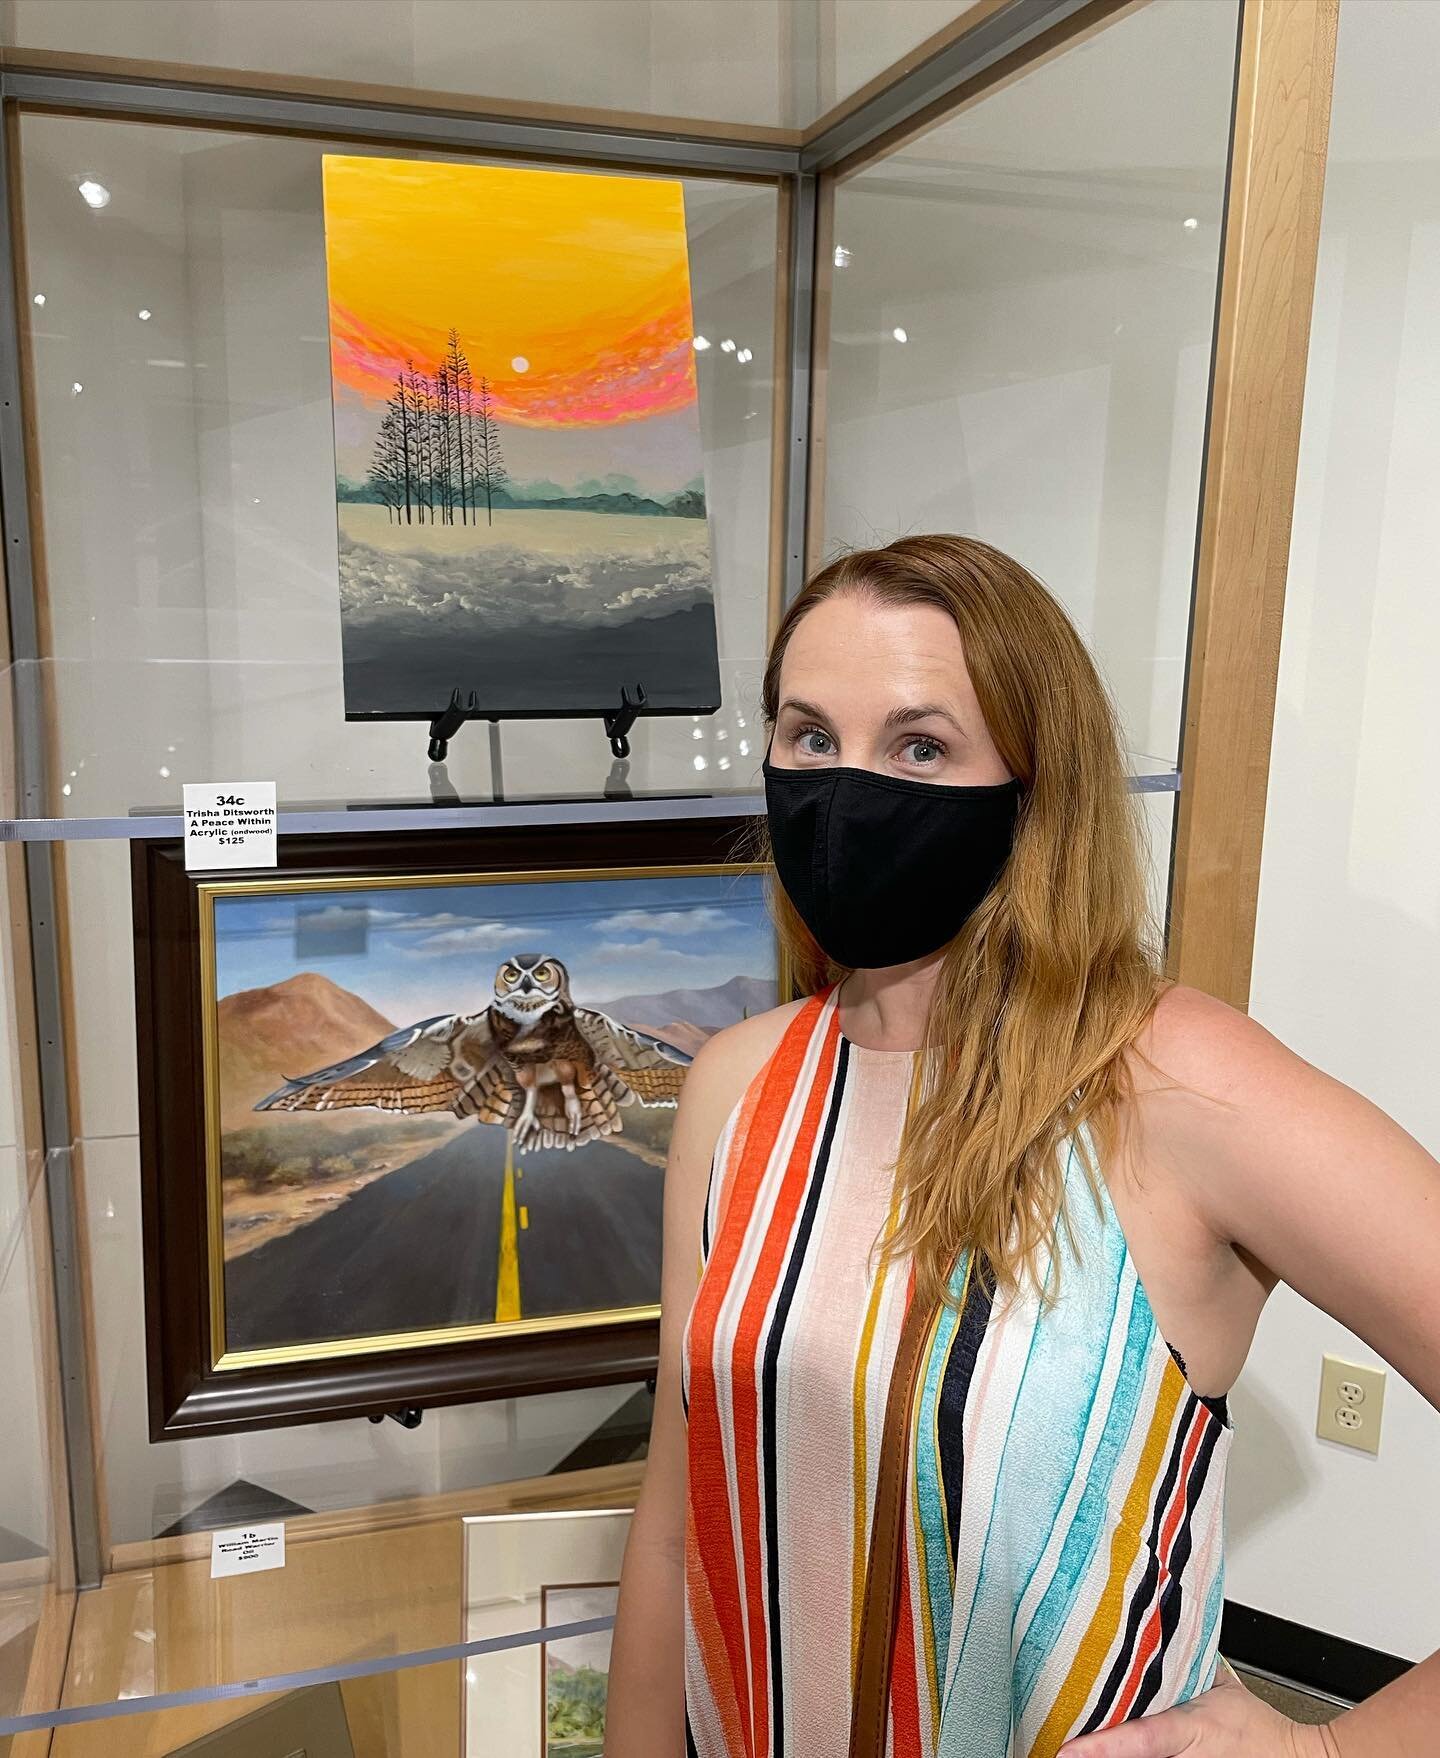 54 - with orange sky! My first showing at an Art Gallery ☺️